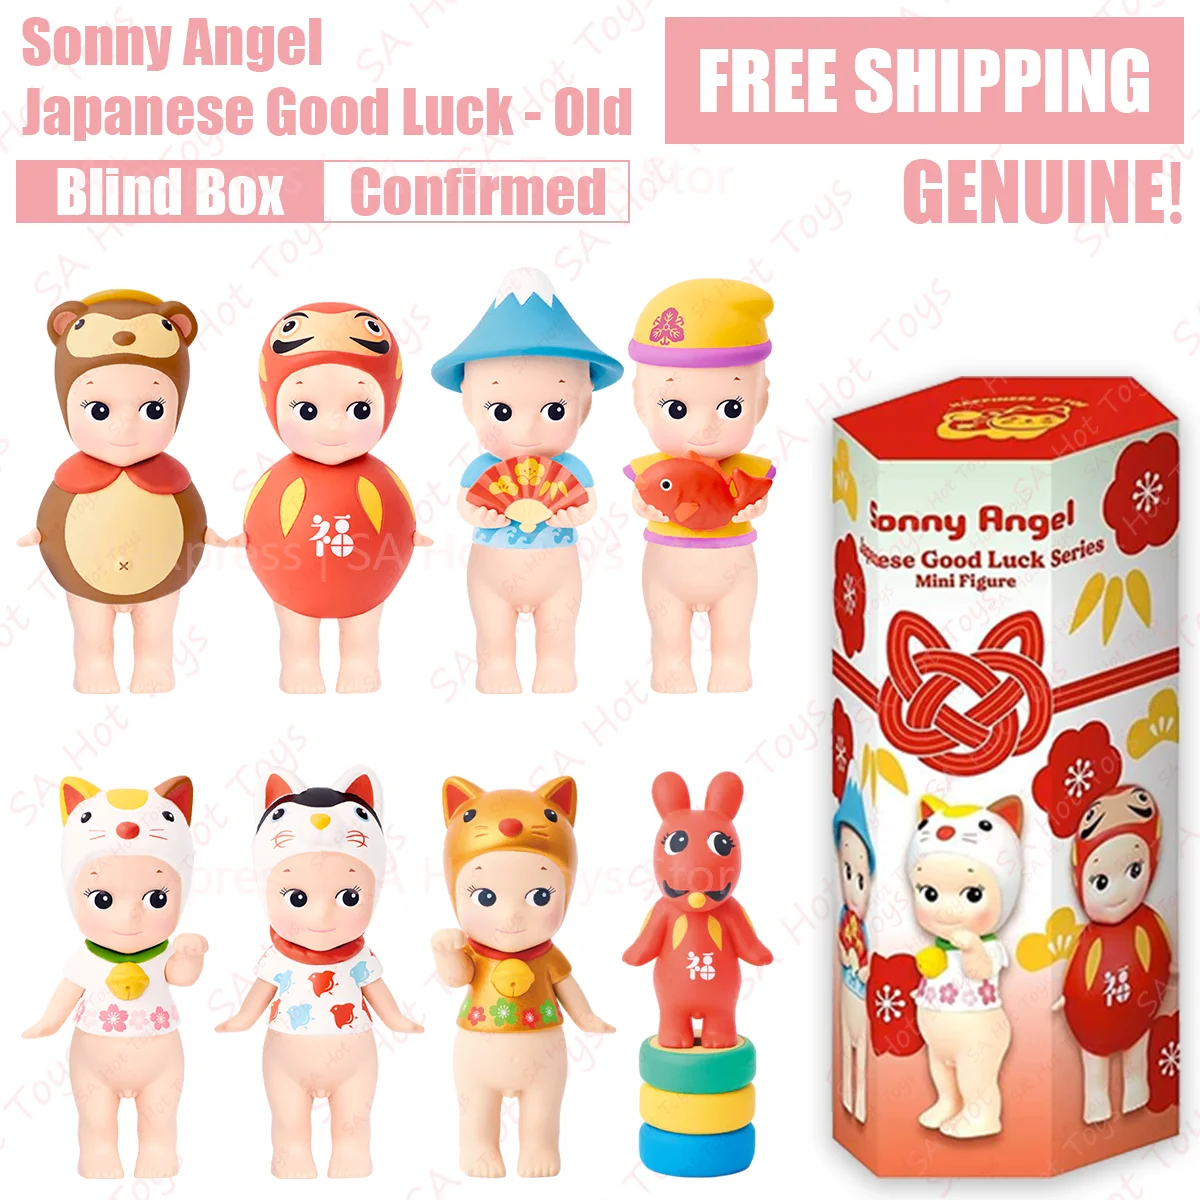 

Sonny Angel Japanese Good Luck Blind Box Confirmed style Genuine telephone Screen Decoration Birthday Gift Mysterious Surprise